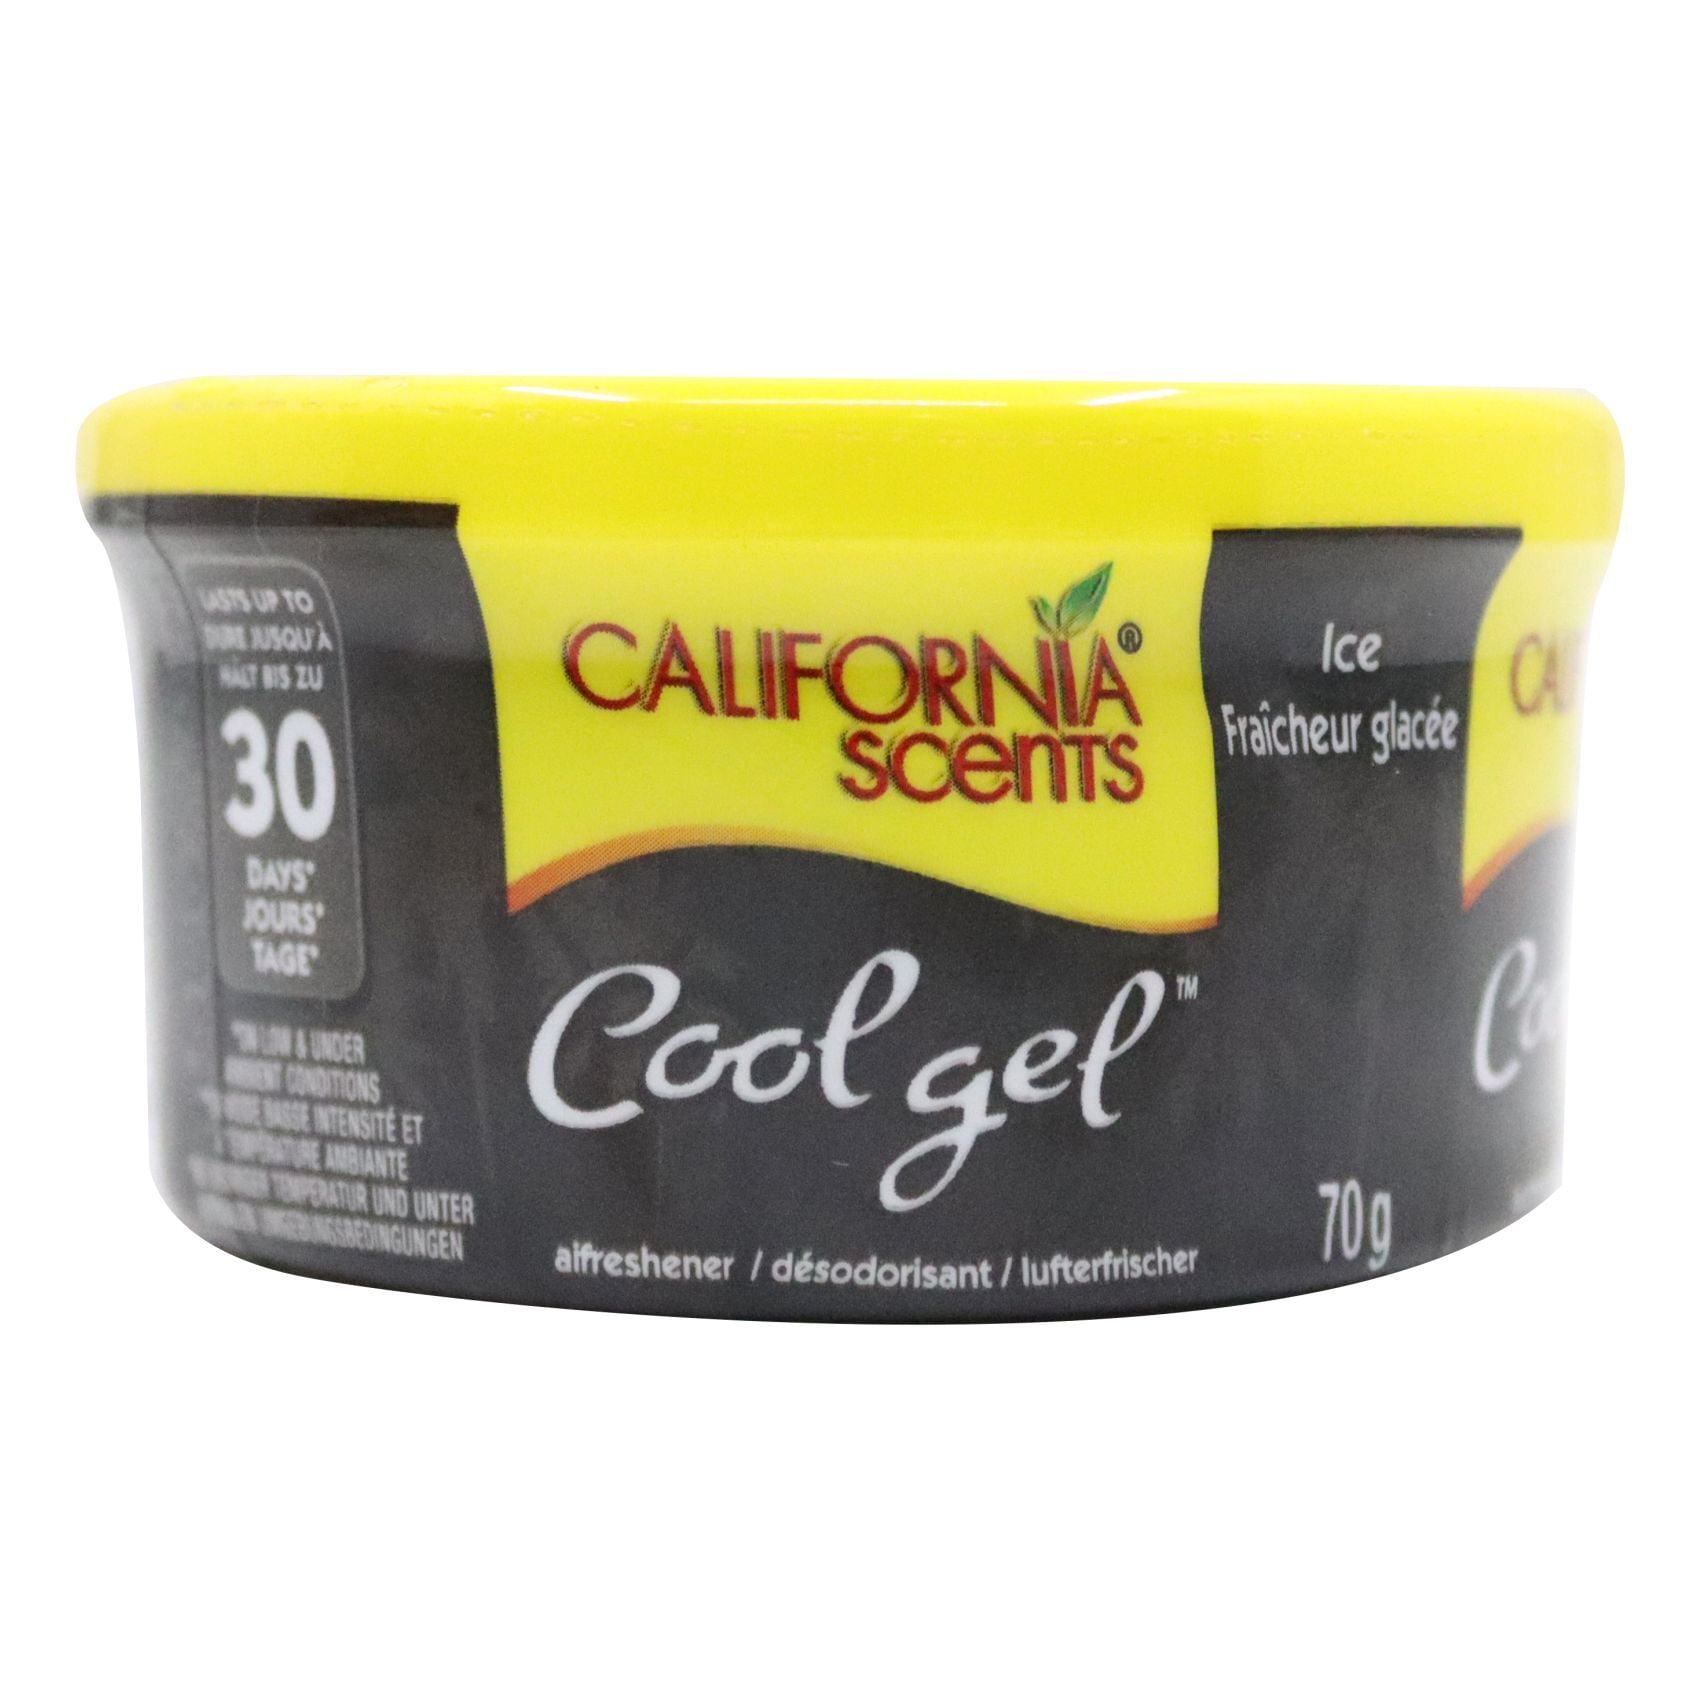 Buy California Scents Ice Fraicheur Glacee Cool Gel Air Freshener Clear 70g  Online - Shop Automotive on Carrefour UAE